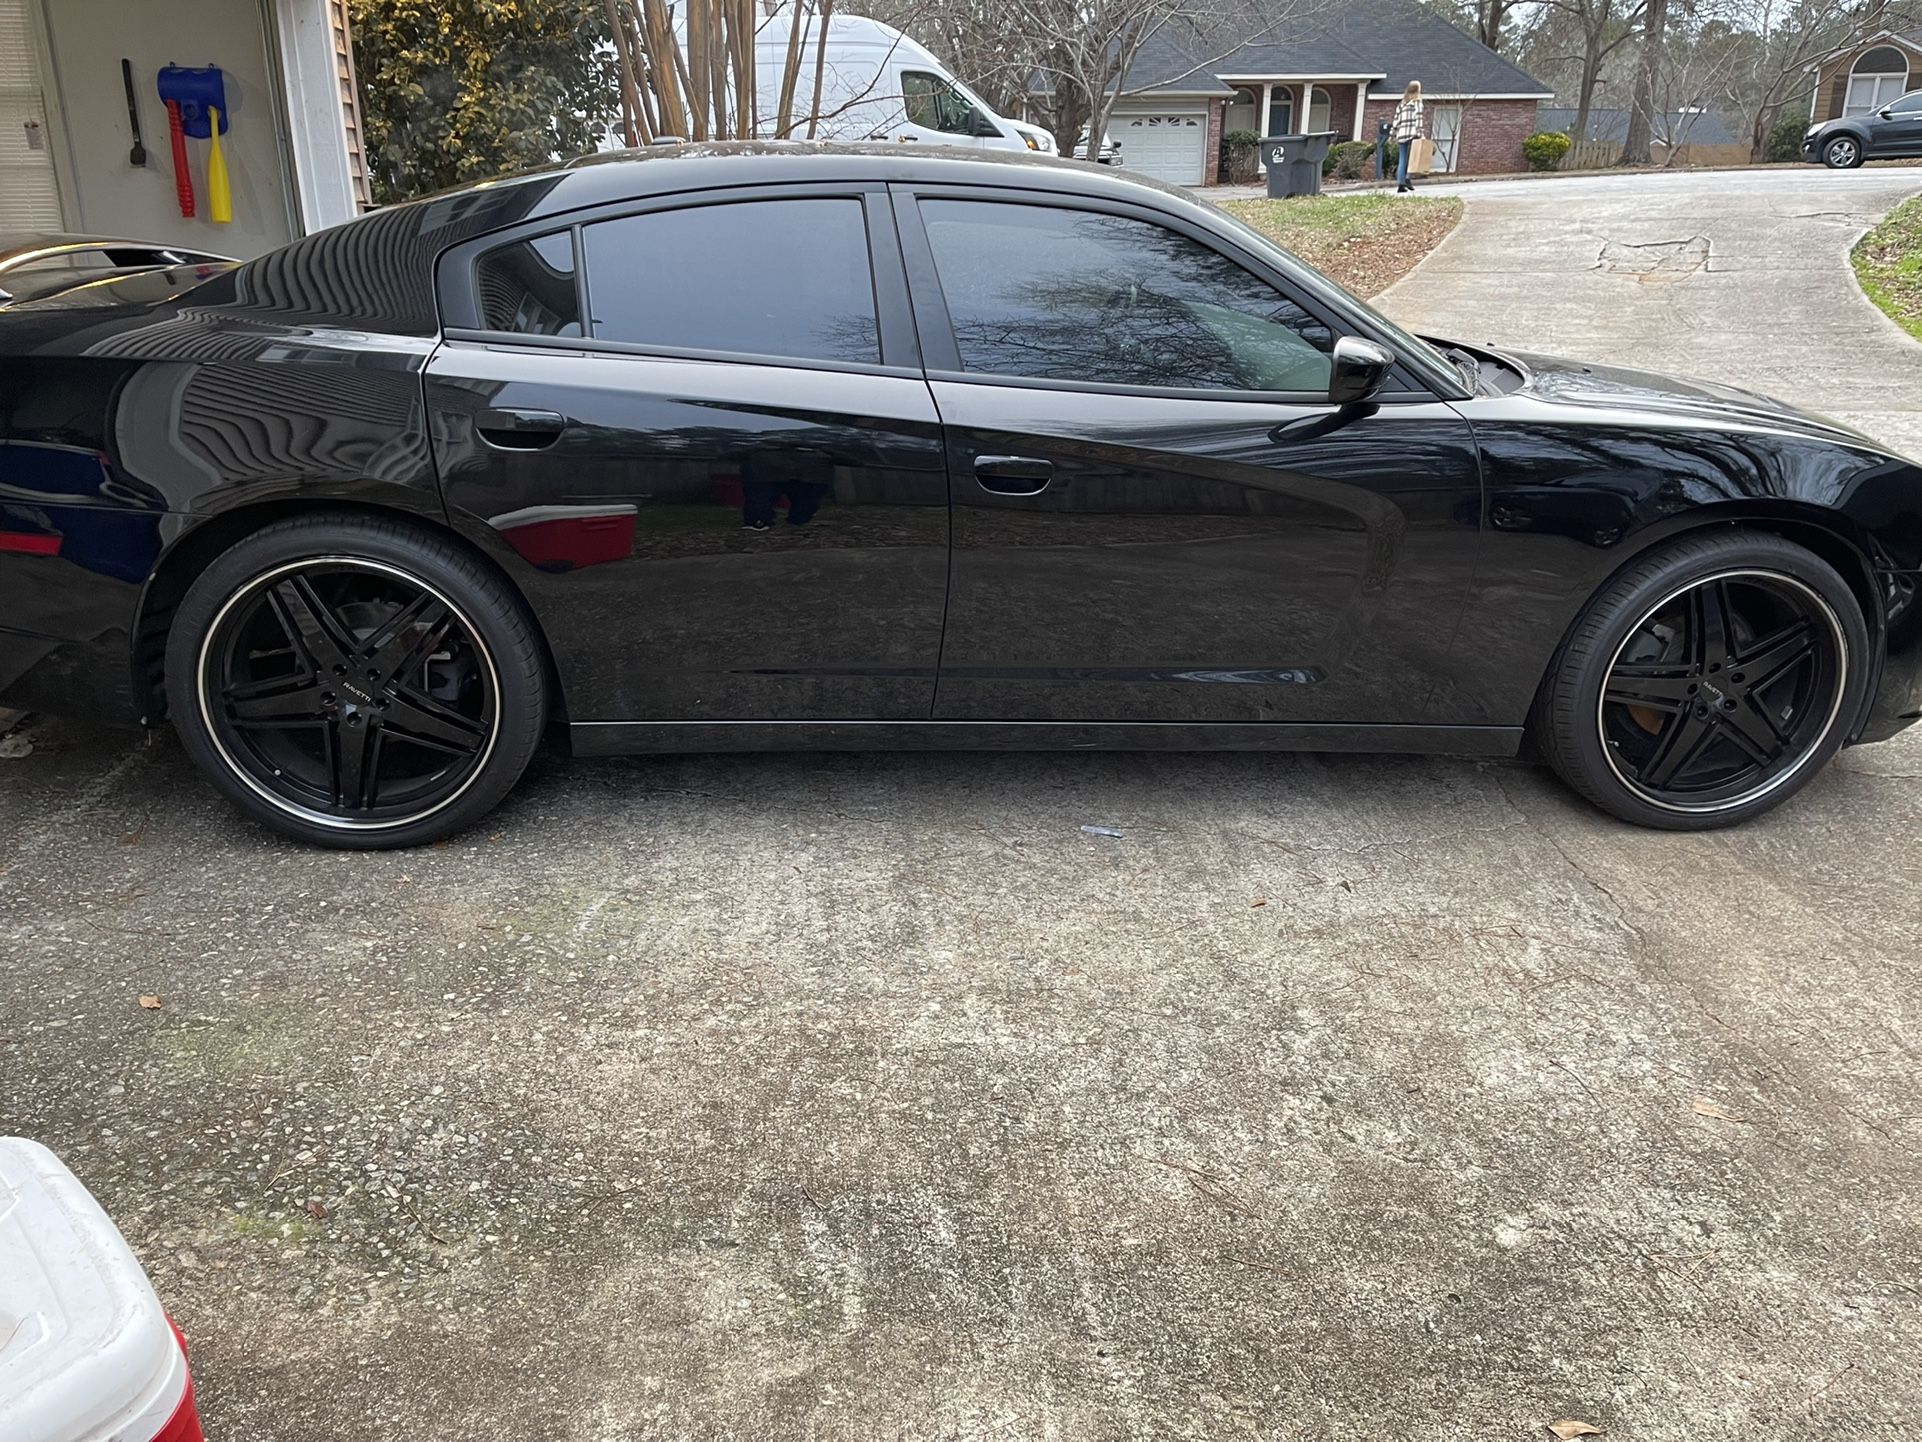 2014 DODGE CHARGER Sxt Plus. Black Top Package 22in Ravetti Rims Leather Interior Heated Seats. BEATS BY DRE SPEAKERS /10inch Beats By Dre Subwoofer 